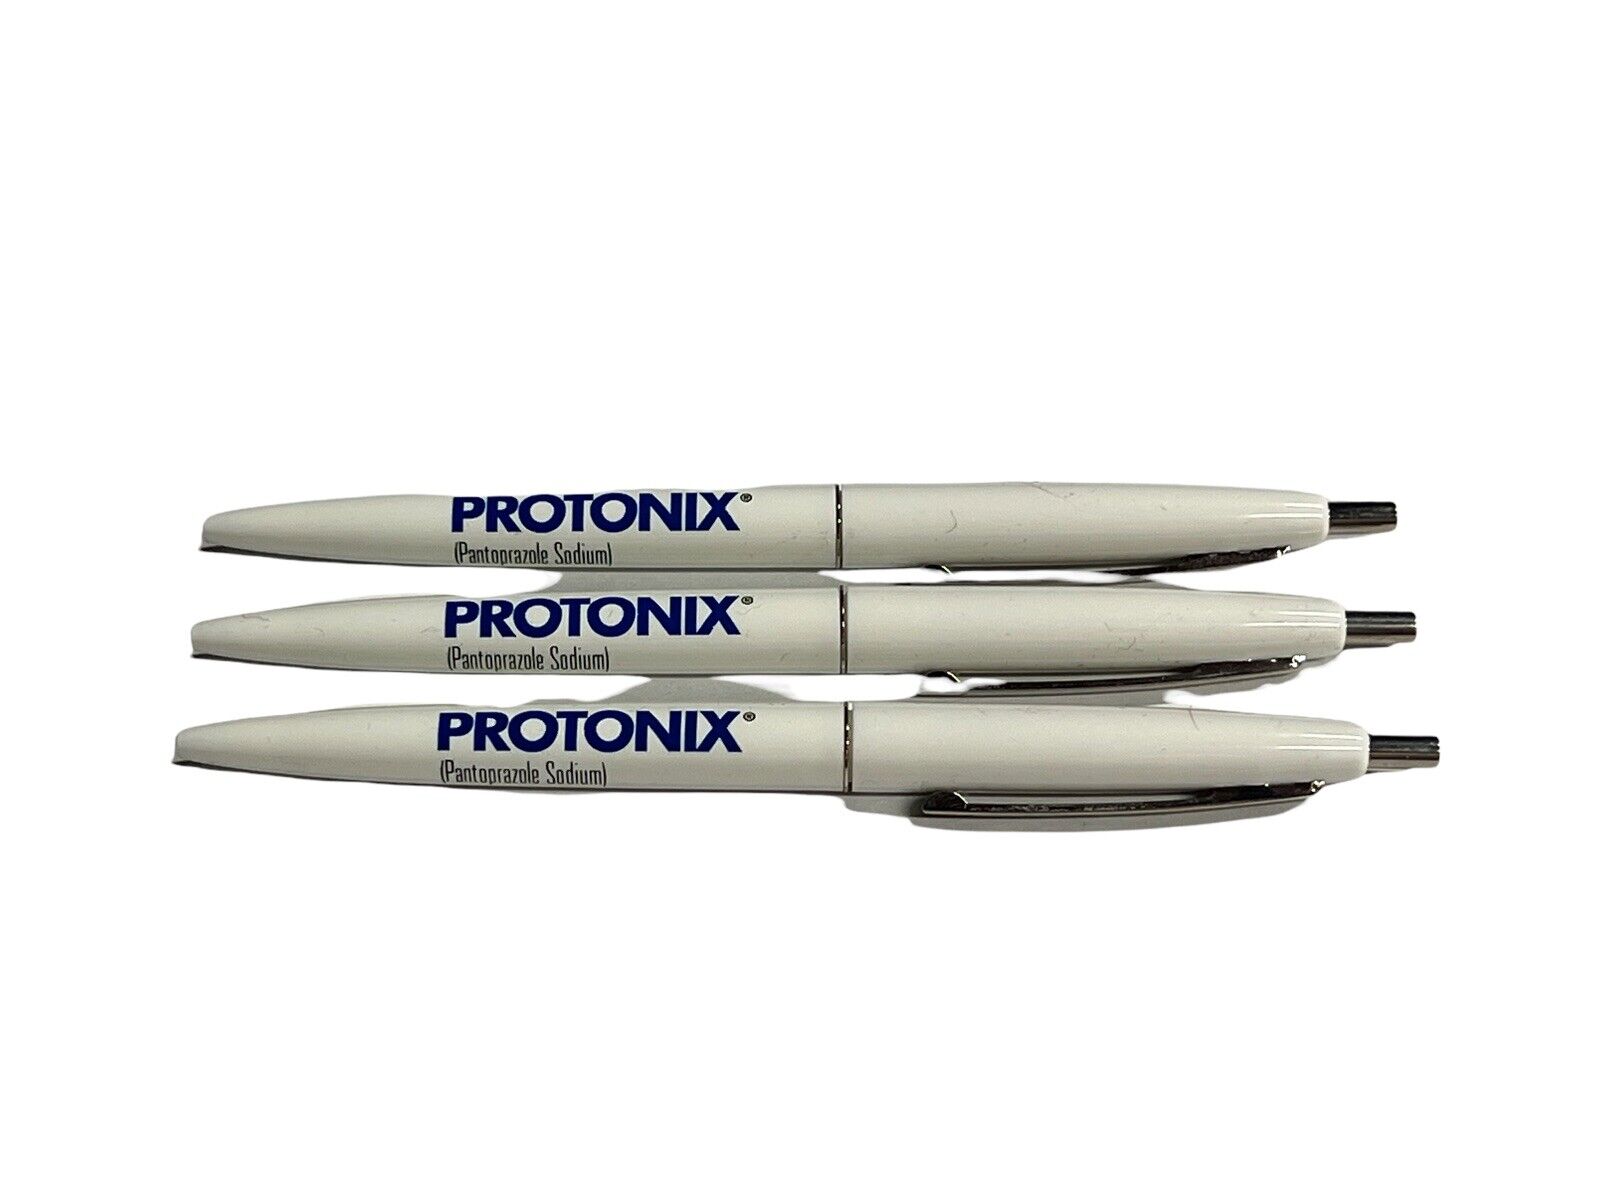 Set of 3 PROTONIX Pharmaceutical Drug Rep BIC Click Style Pens White with Blue